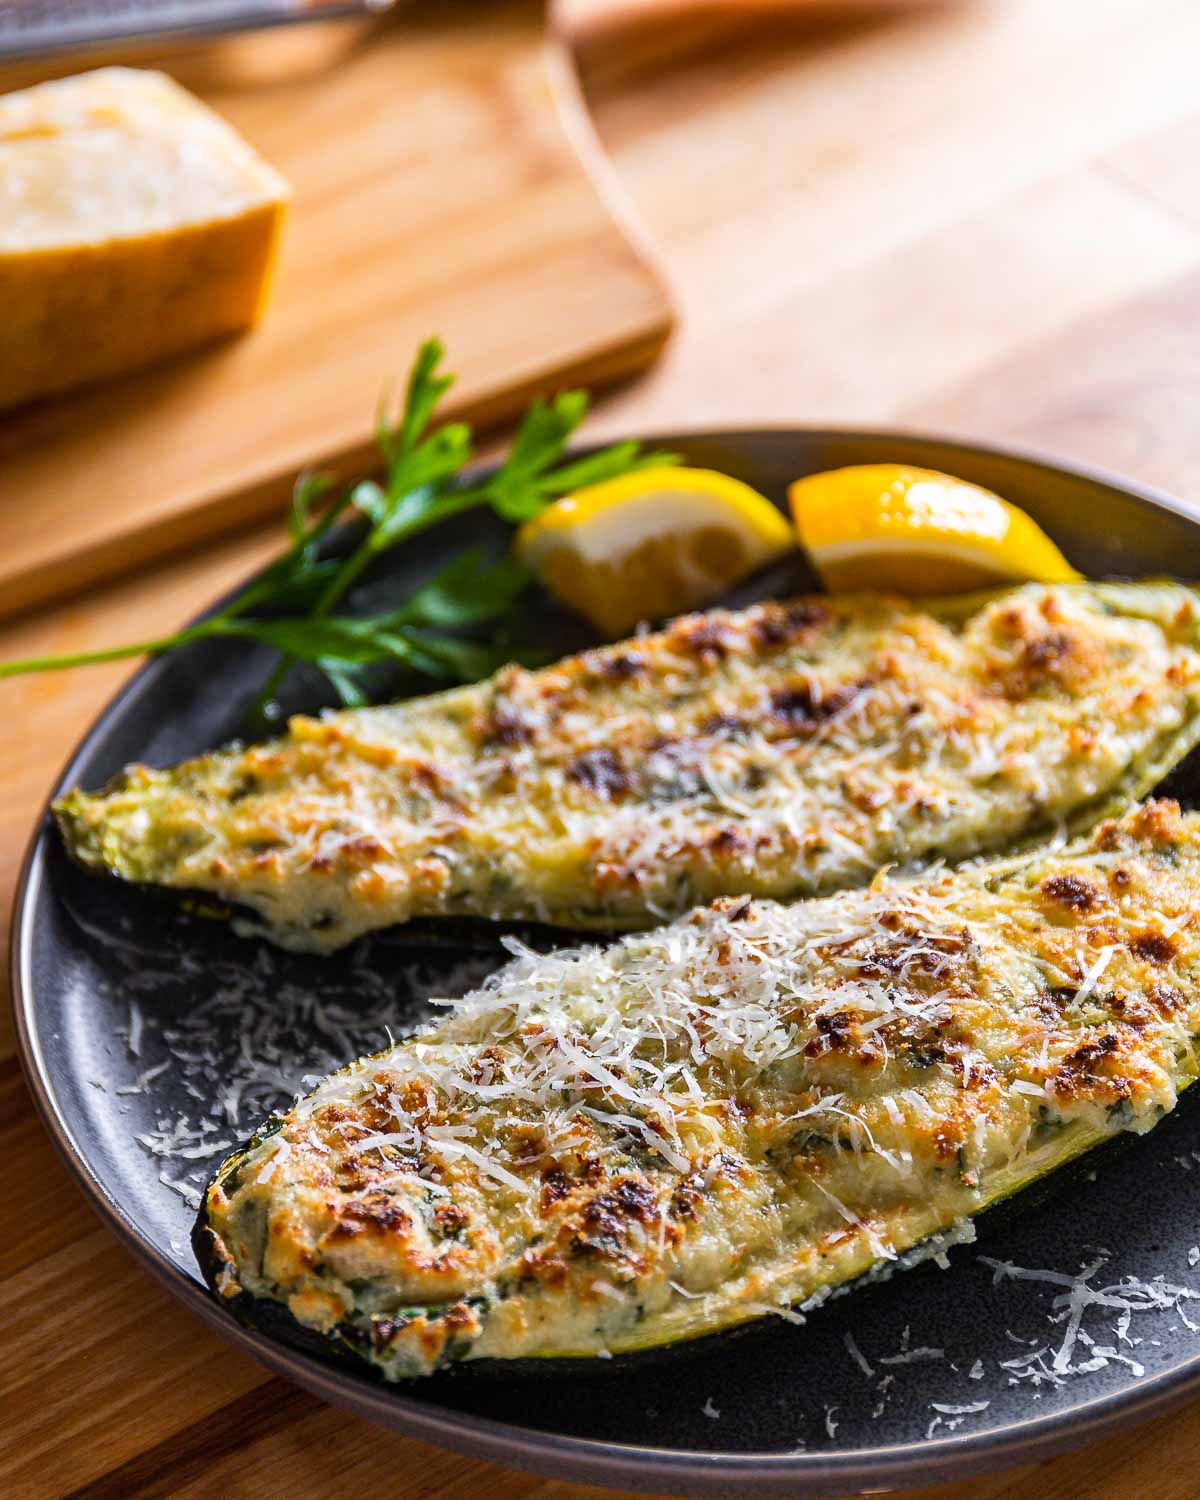 Two stuffed zucchini pieces in grey plate with lemon and parsley garnish.